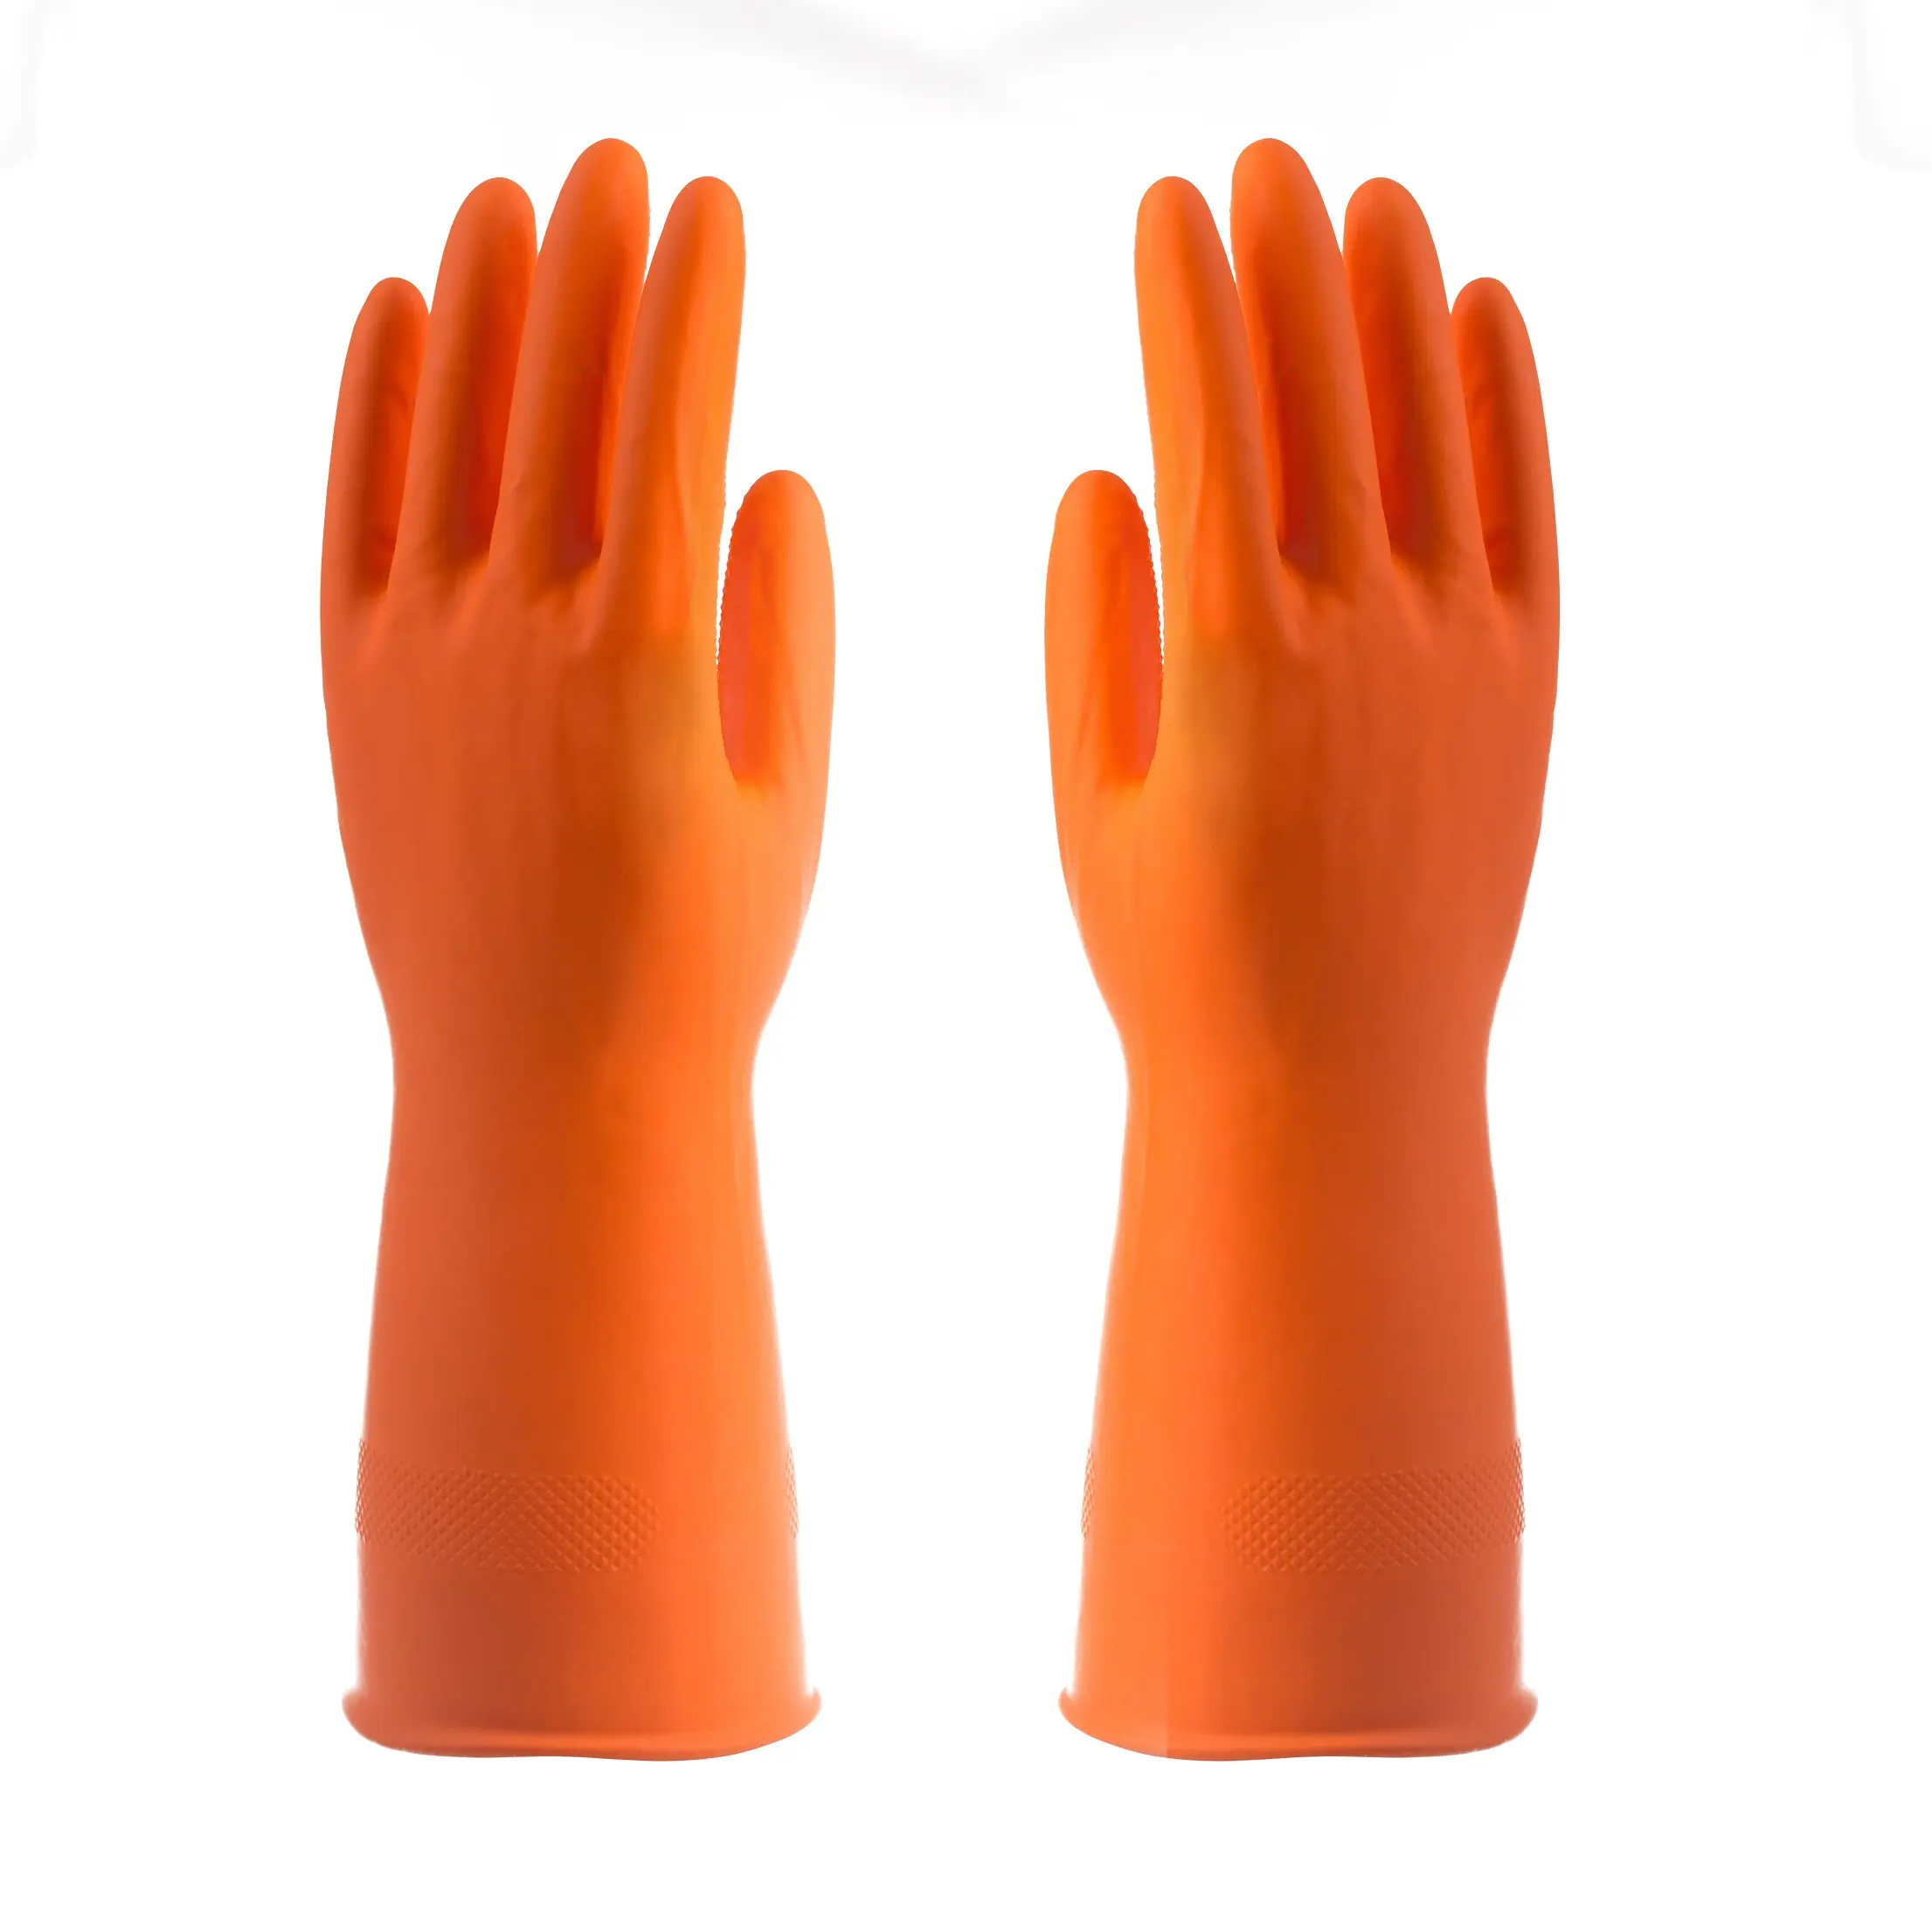 Wholesale Feie Brand Protective Household Cleaning Gloves For Hand Protecting